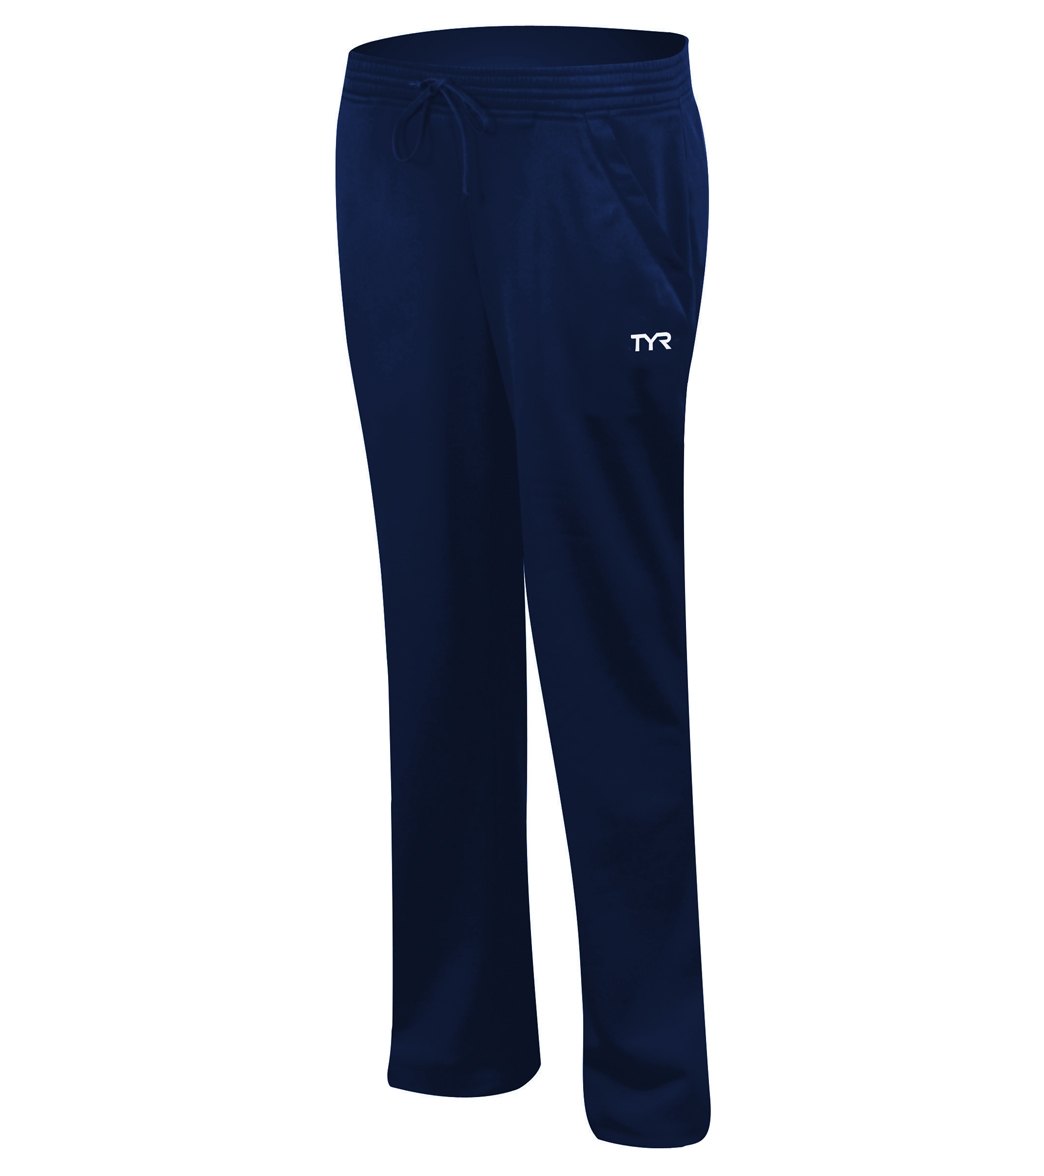 TYR Alliance Victory Women's Warm Up Pants - Navy Xl Polyester - Swimoutlet.com